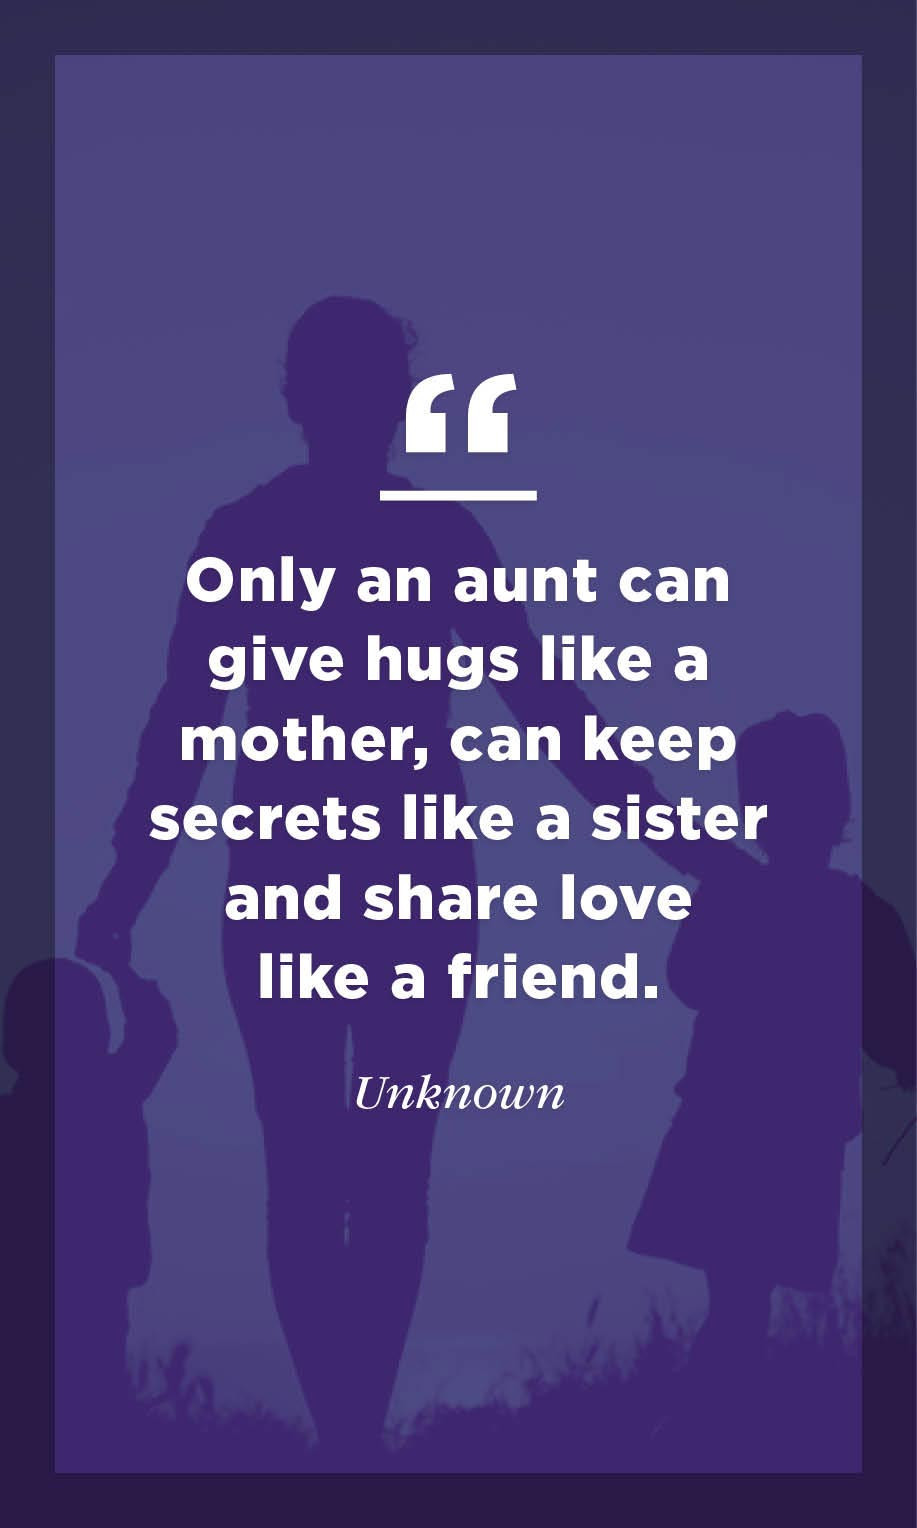 Aunt Like A Mother Quotes
 100 Thoughtful Mother’s Day Quotes for 2019